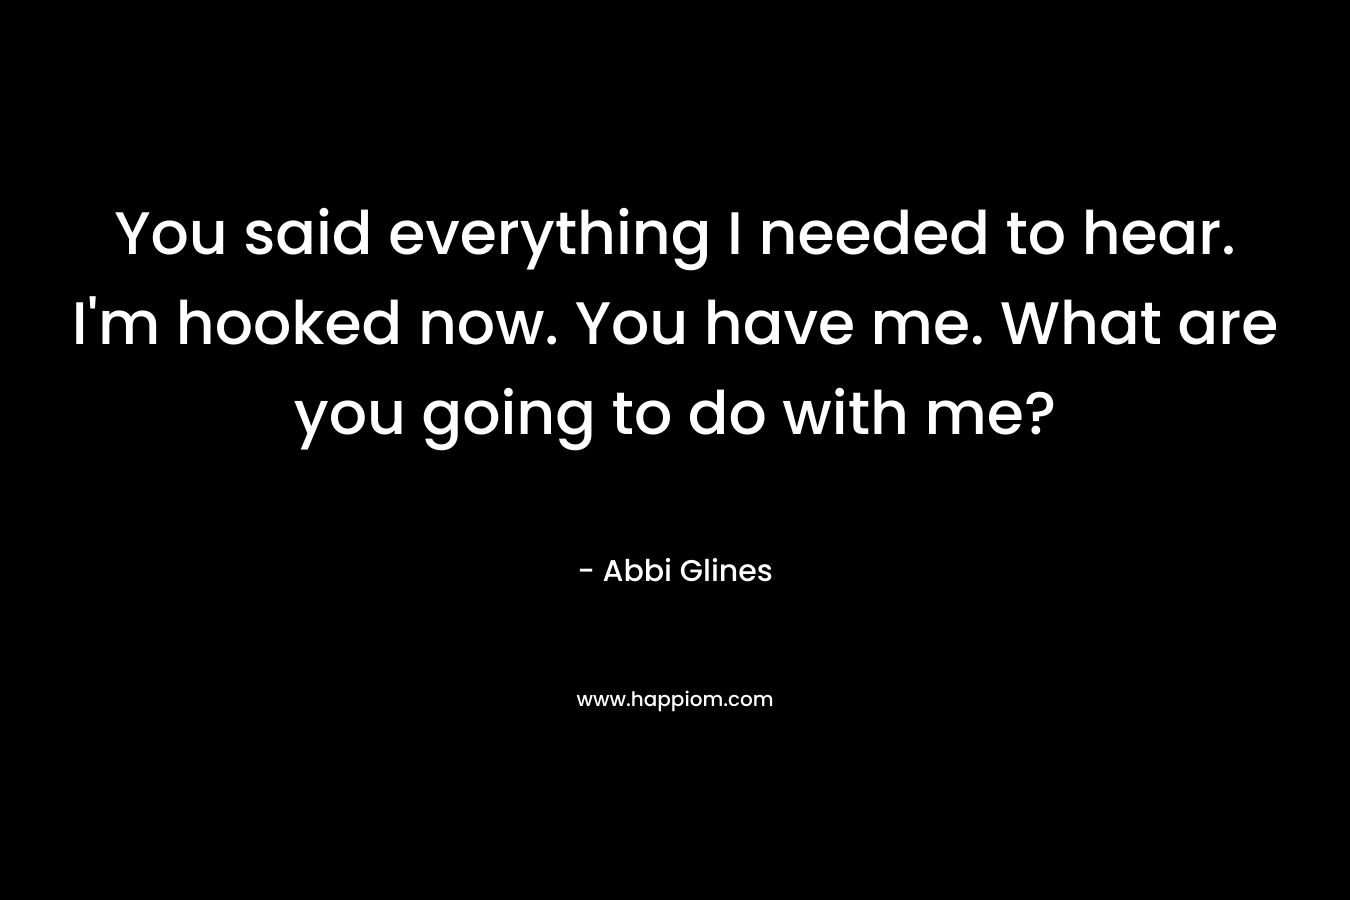 You said everything I needed to hear. I’m hooked now. You have me. What are you going to do with me? – Abbi Glines